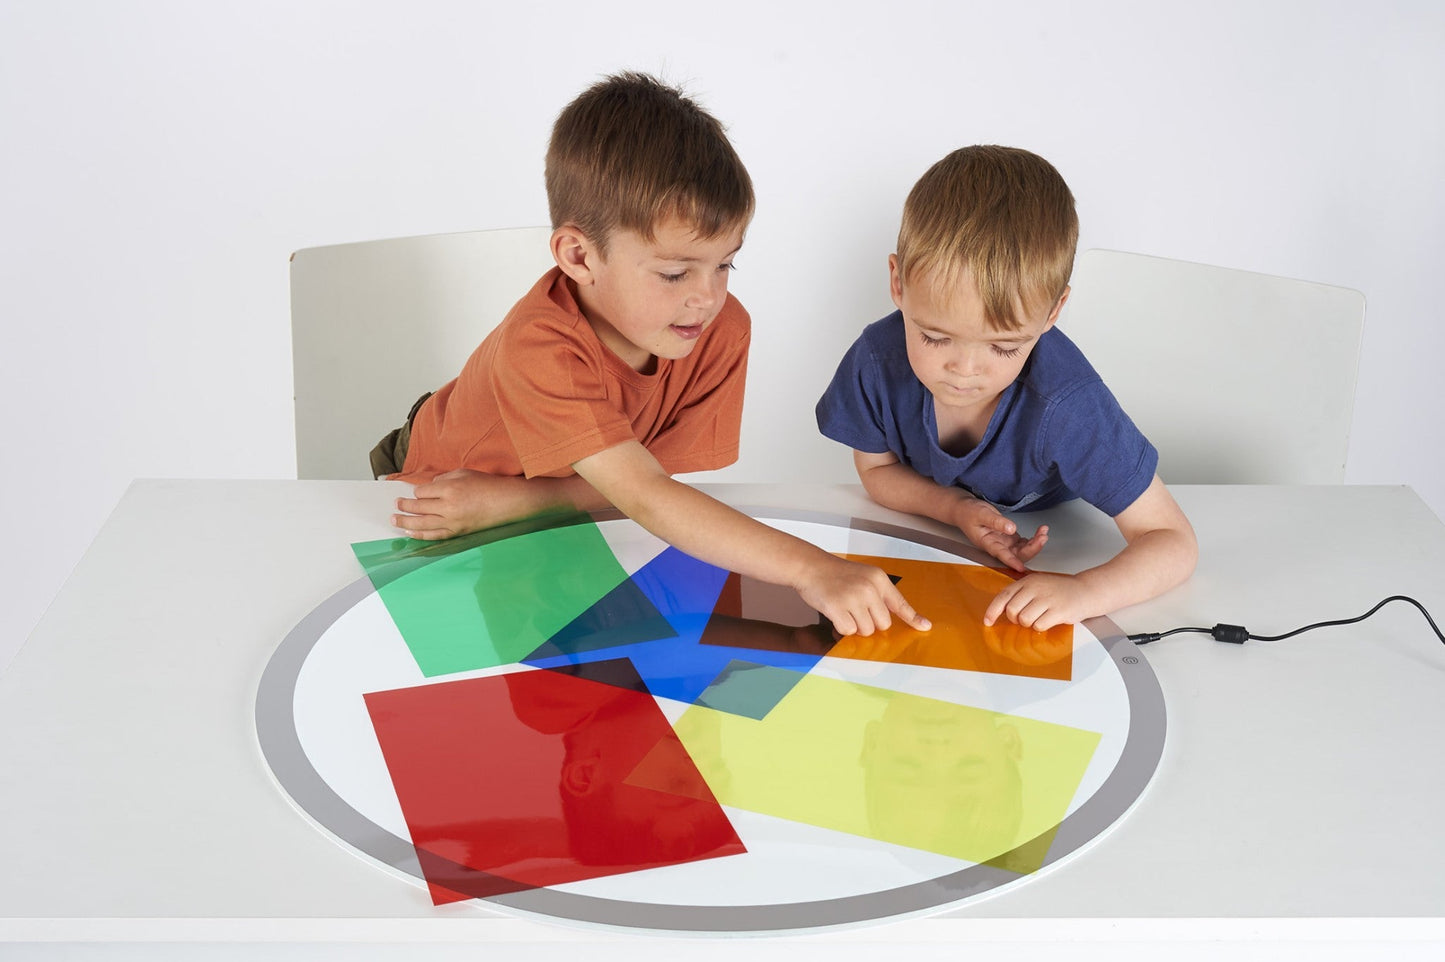 Tickit - Colour Acetate Sheets - Playlaan